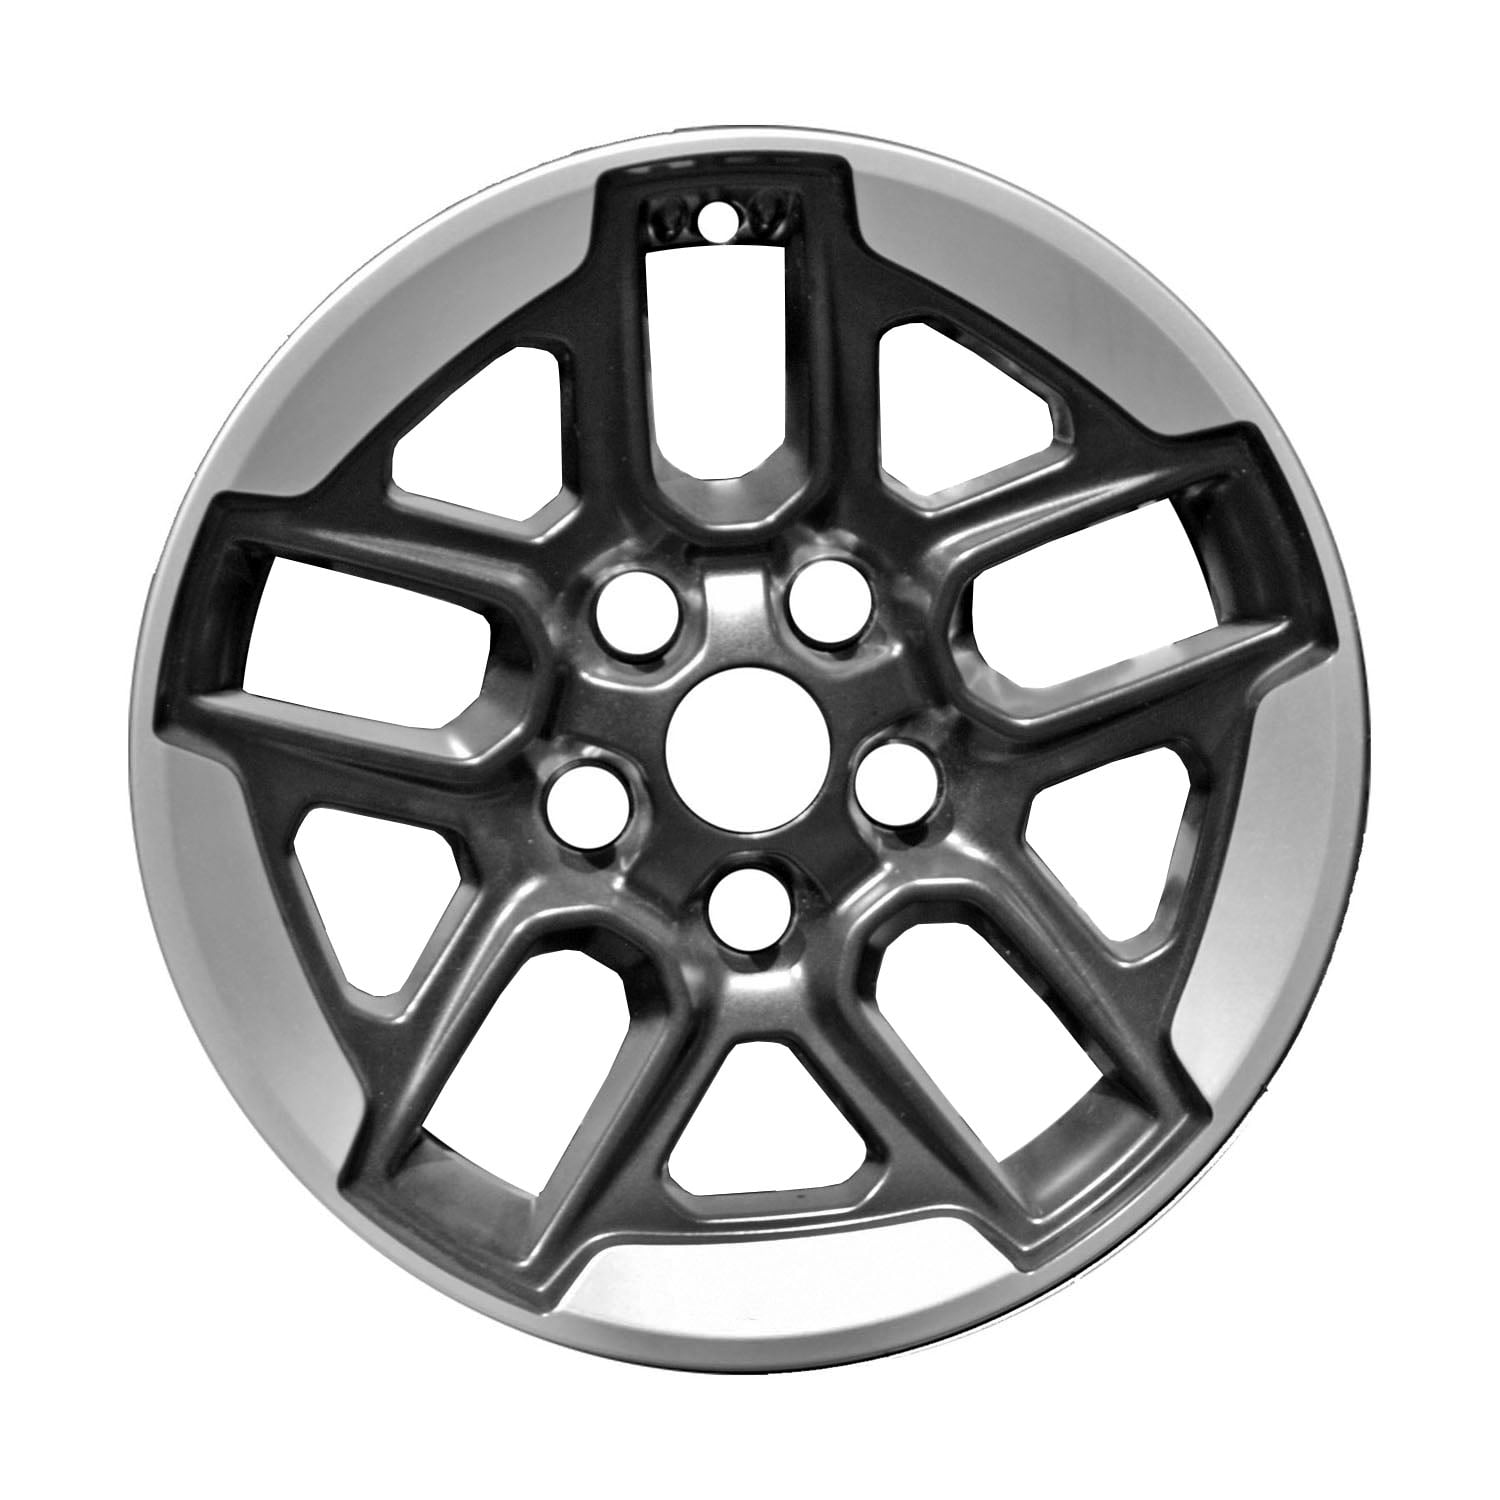 Kai 17 X  Reconditioned OEM Aluminum Alloy Wheel, All Painted Black with  Polished Lip, Fits 2018 - 2021 Jeep Wrangler JL 